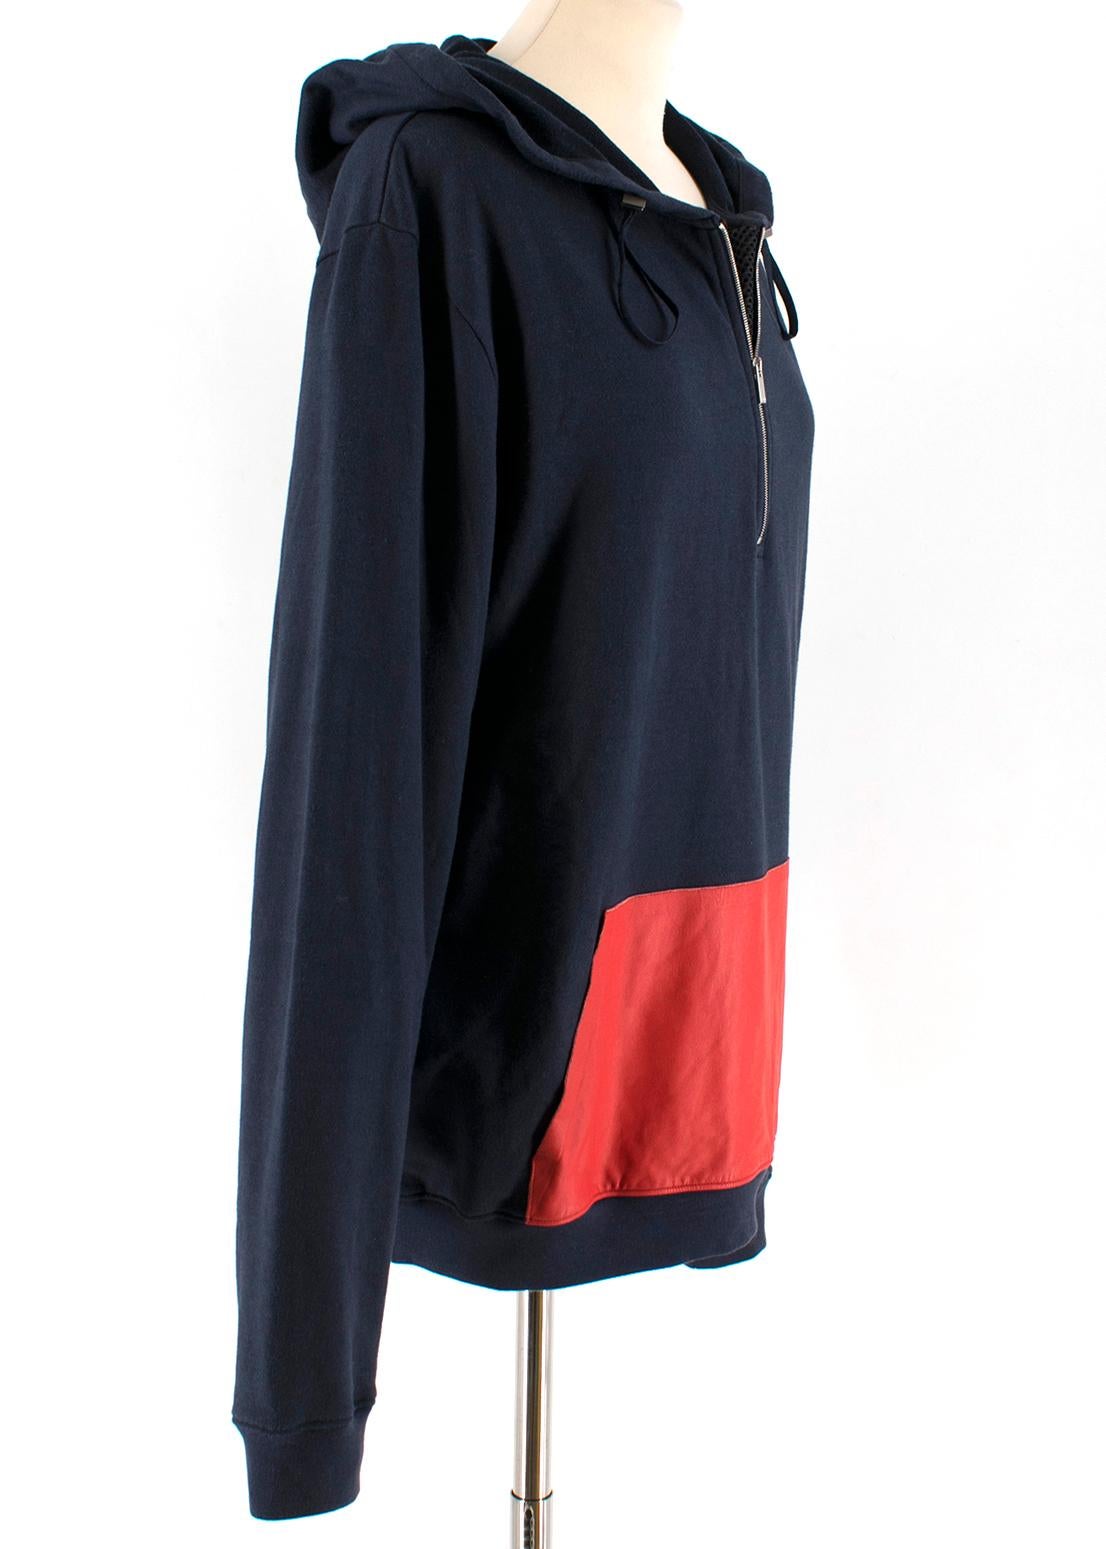 Fendi Navy Sweatshirt with Red Contrast Pocket

Navy Sweatshirt  
Hood
Red leather front pocket
elasticated cuff and rim 
Mid zip closure with netting detailing 
Drawstring
Silver hardware
Authenticity label inside

Please note, these items are